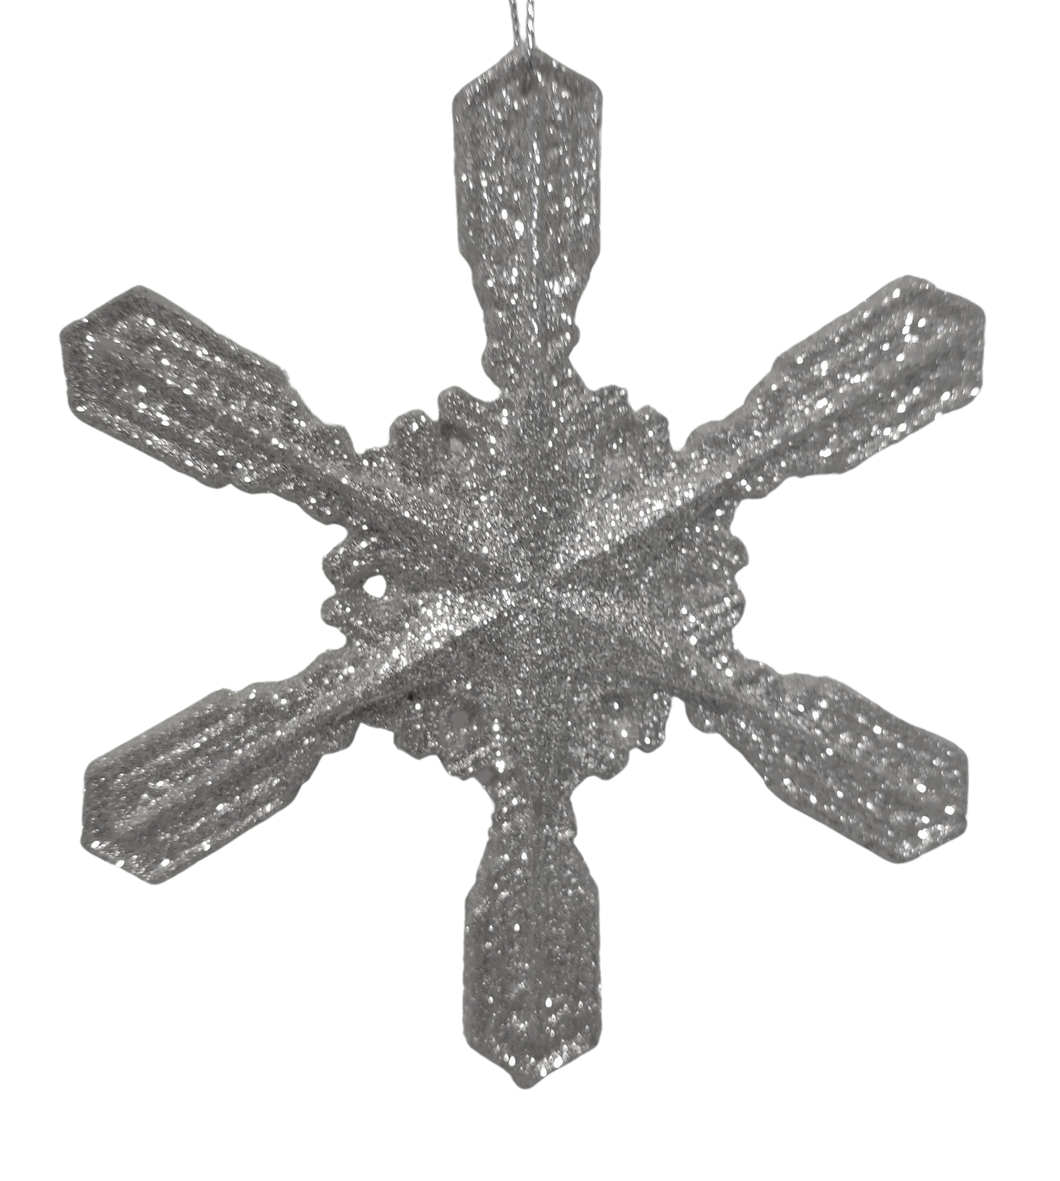 Acrylic Silver Snowflake/Star Ornament with Glitter 4.5